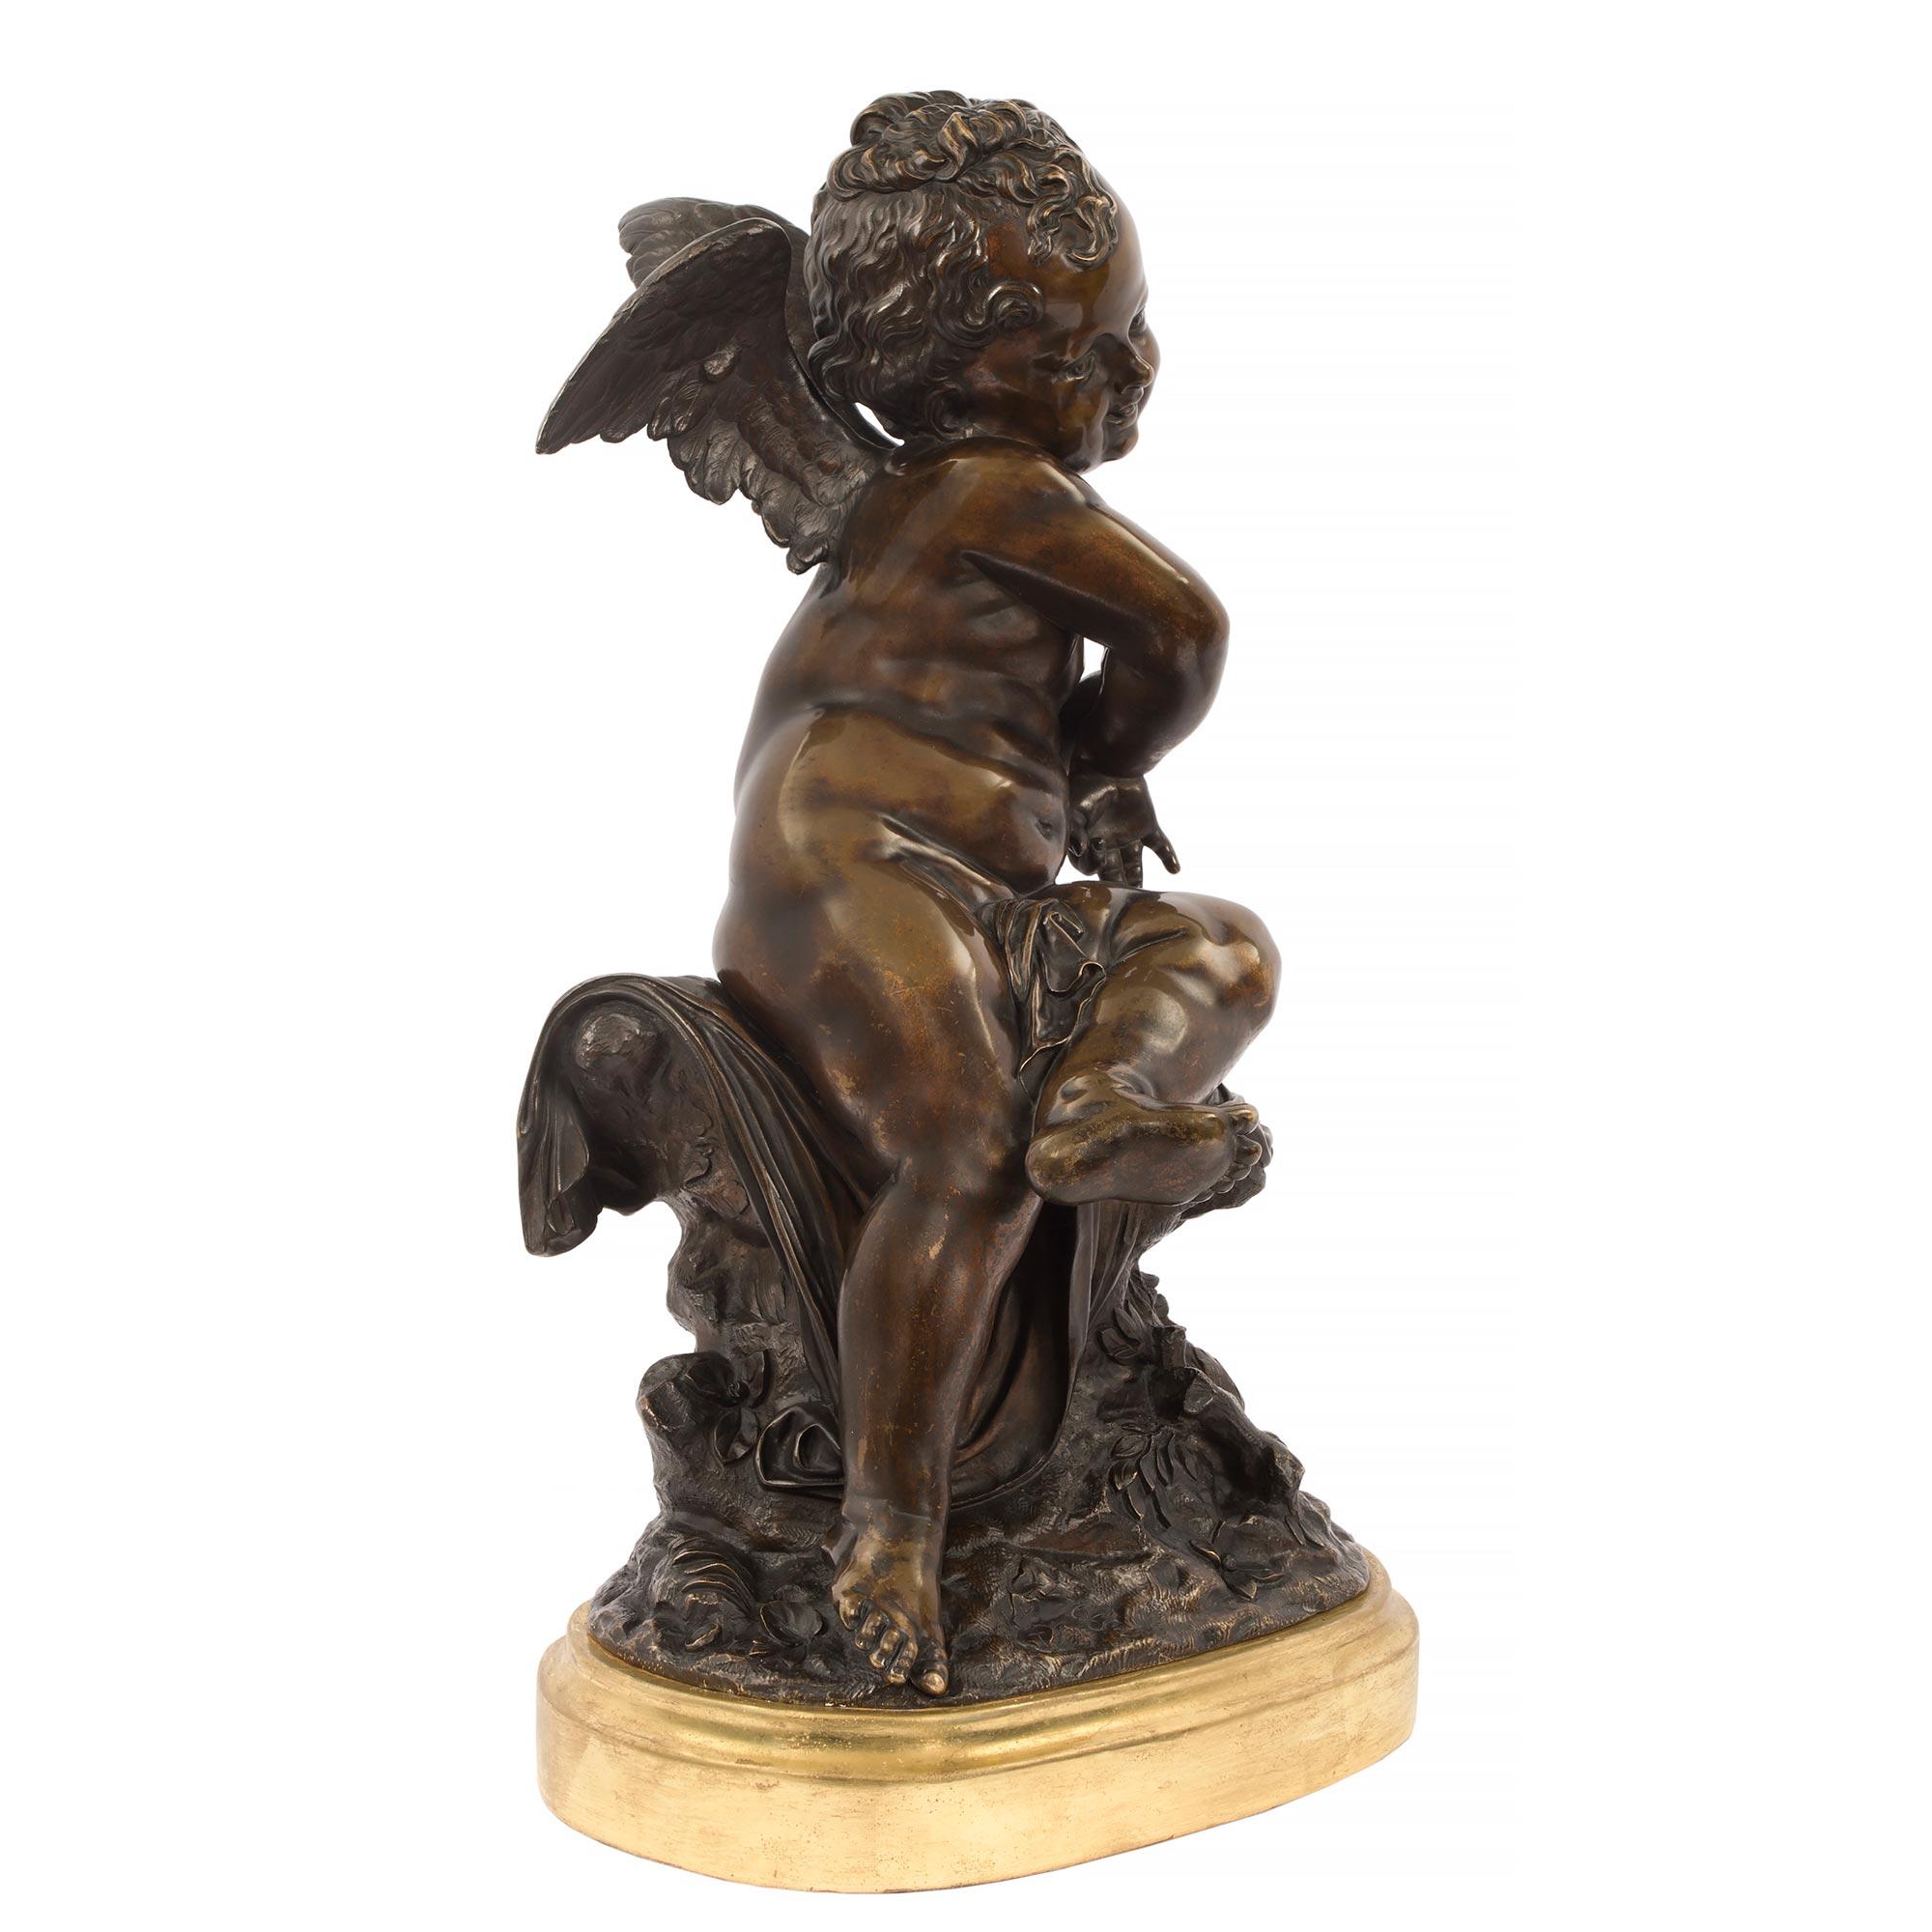 A beautiful and high quality French 19th century Louis XVI st. patinated bronze statue, signed Lemire. The statue is raised by an oval giltwood base with a fine mottled border. Above the richly chased patinated bronze winged cherub is seated on a